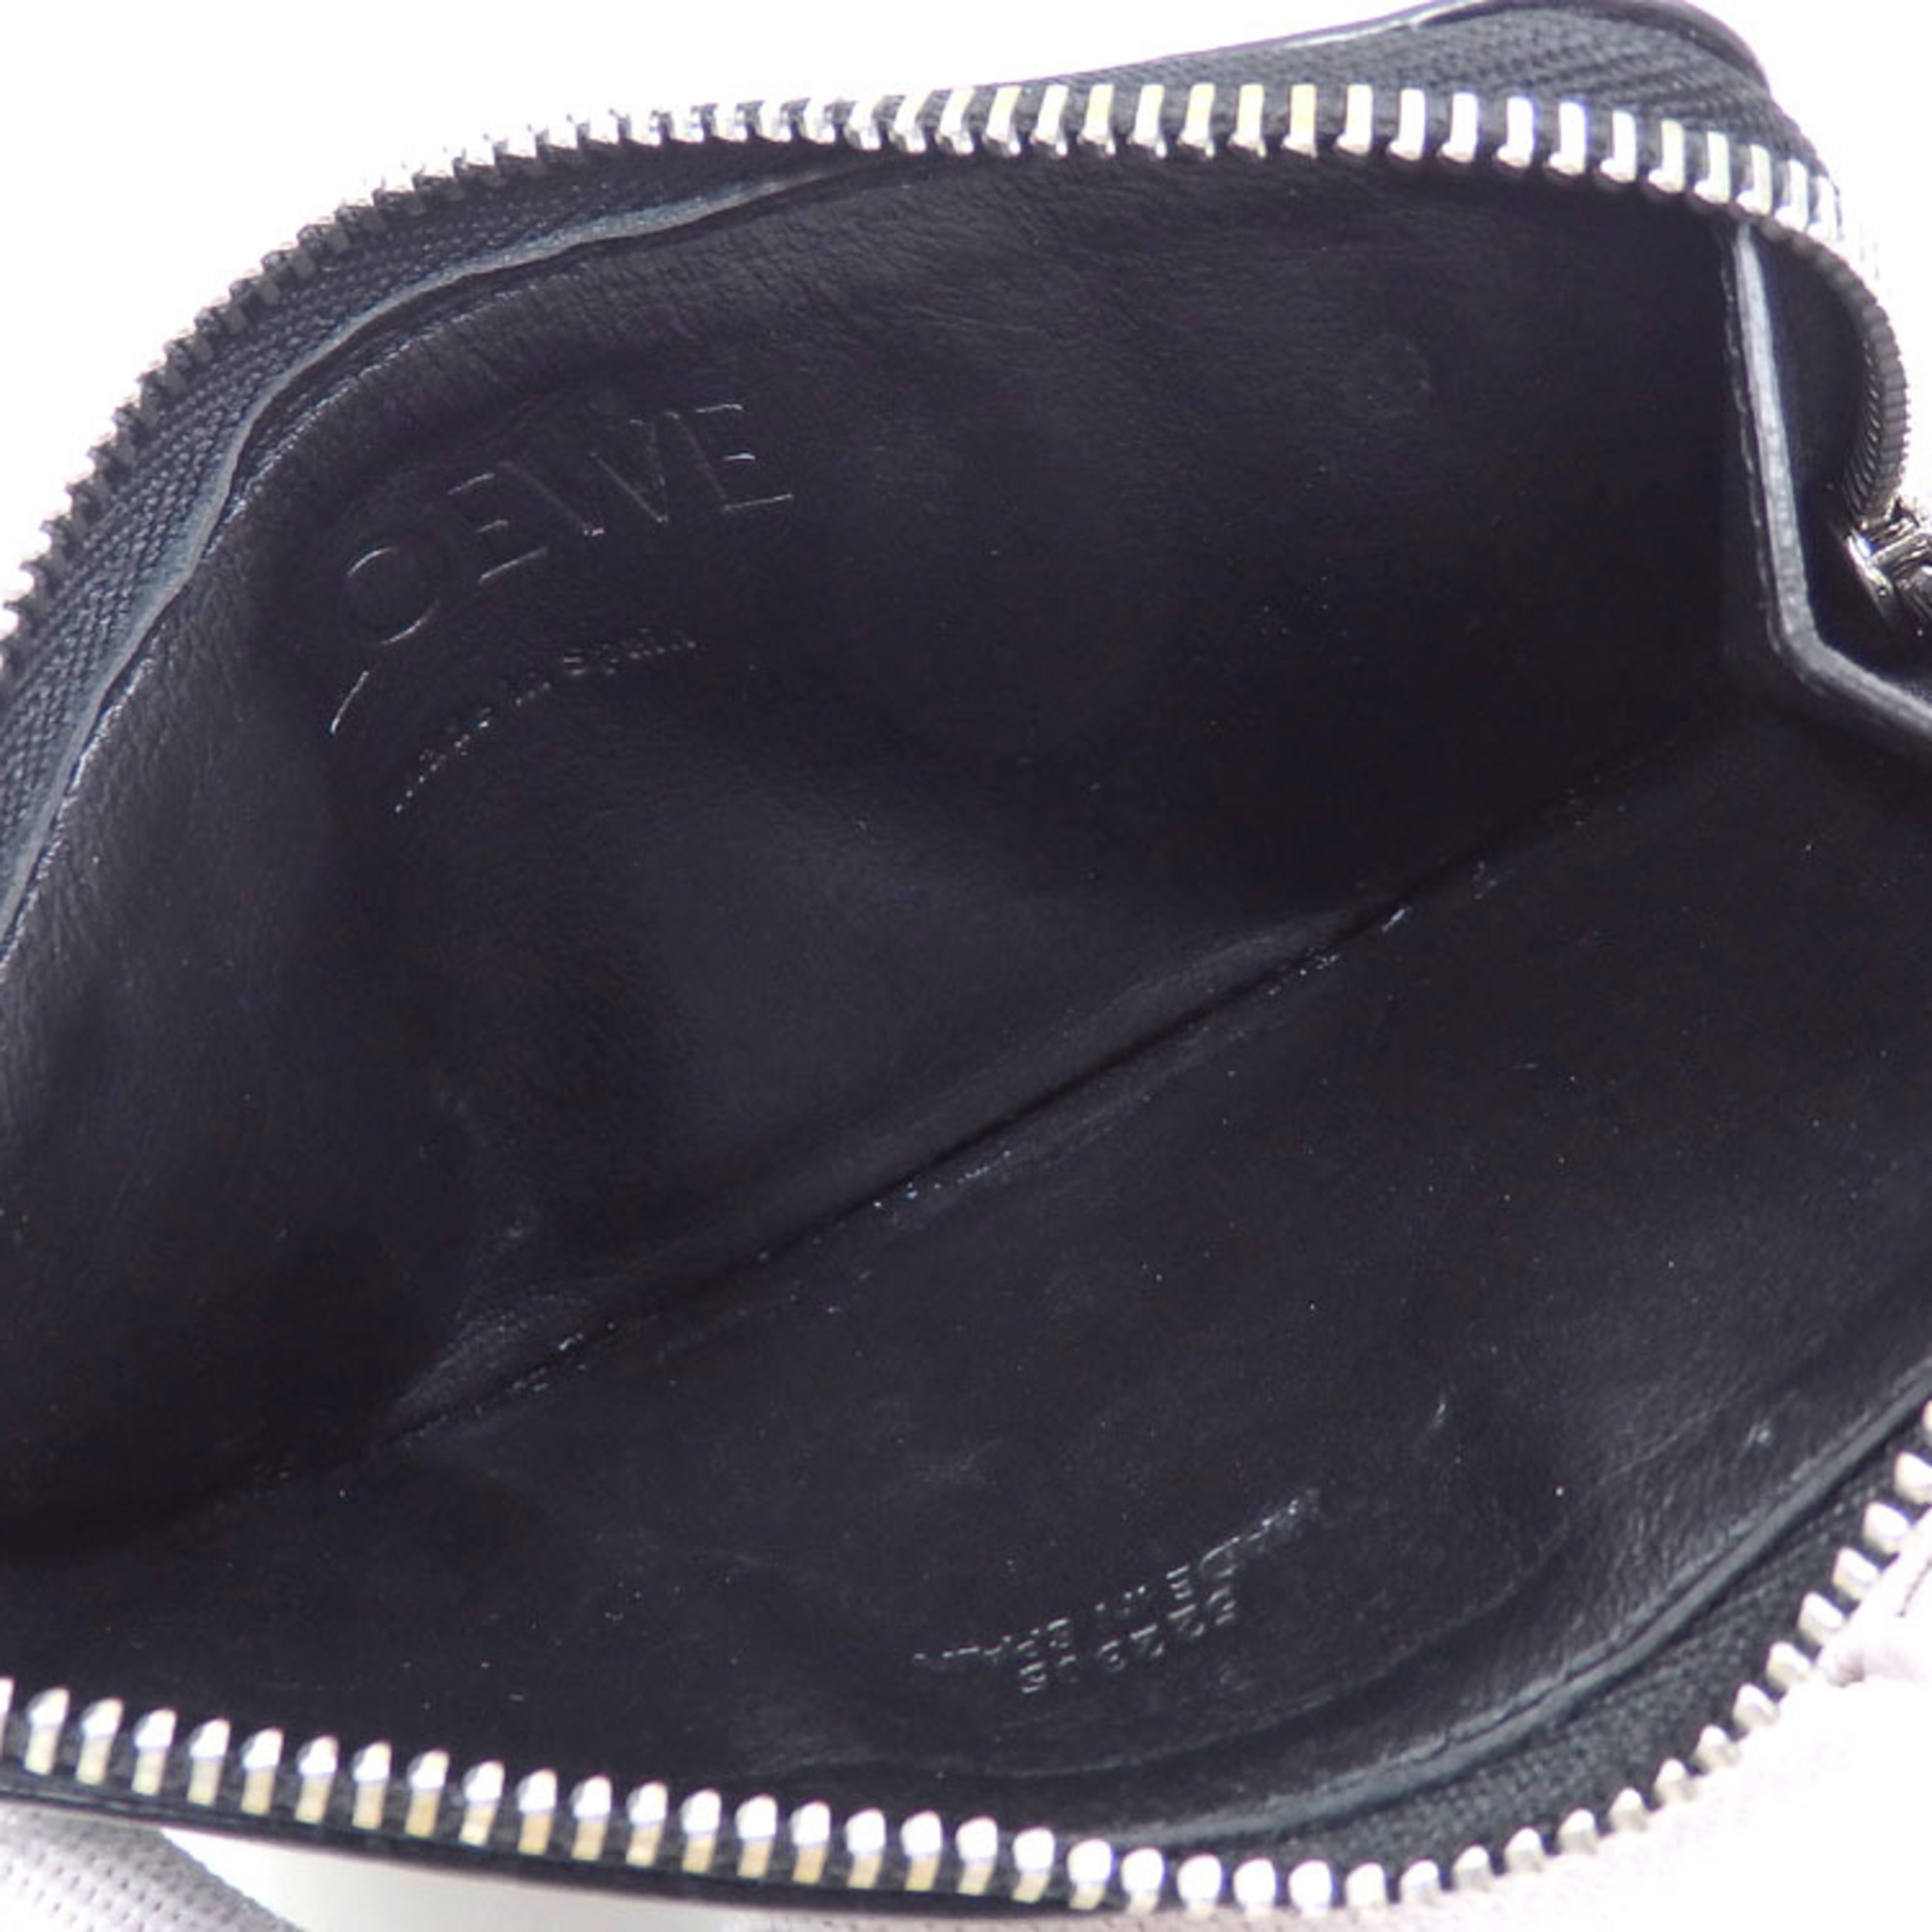 Loewe coin case, card holder, black, leather, purse, L-shaped, for women, men, and unisex